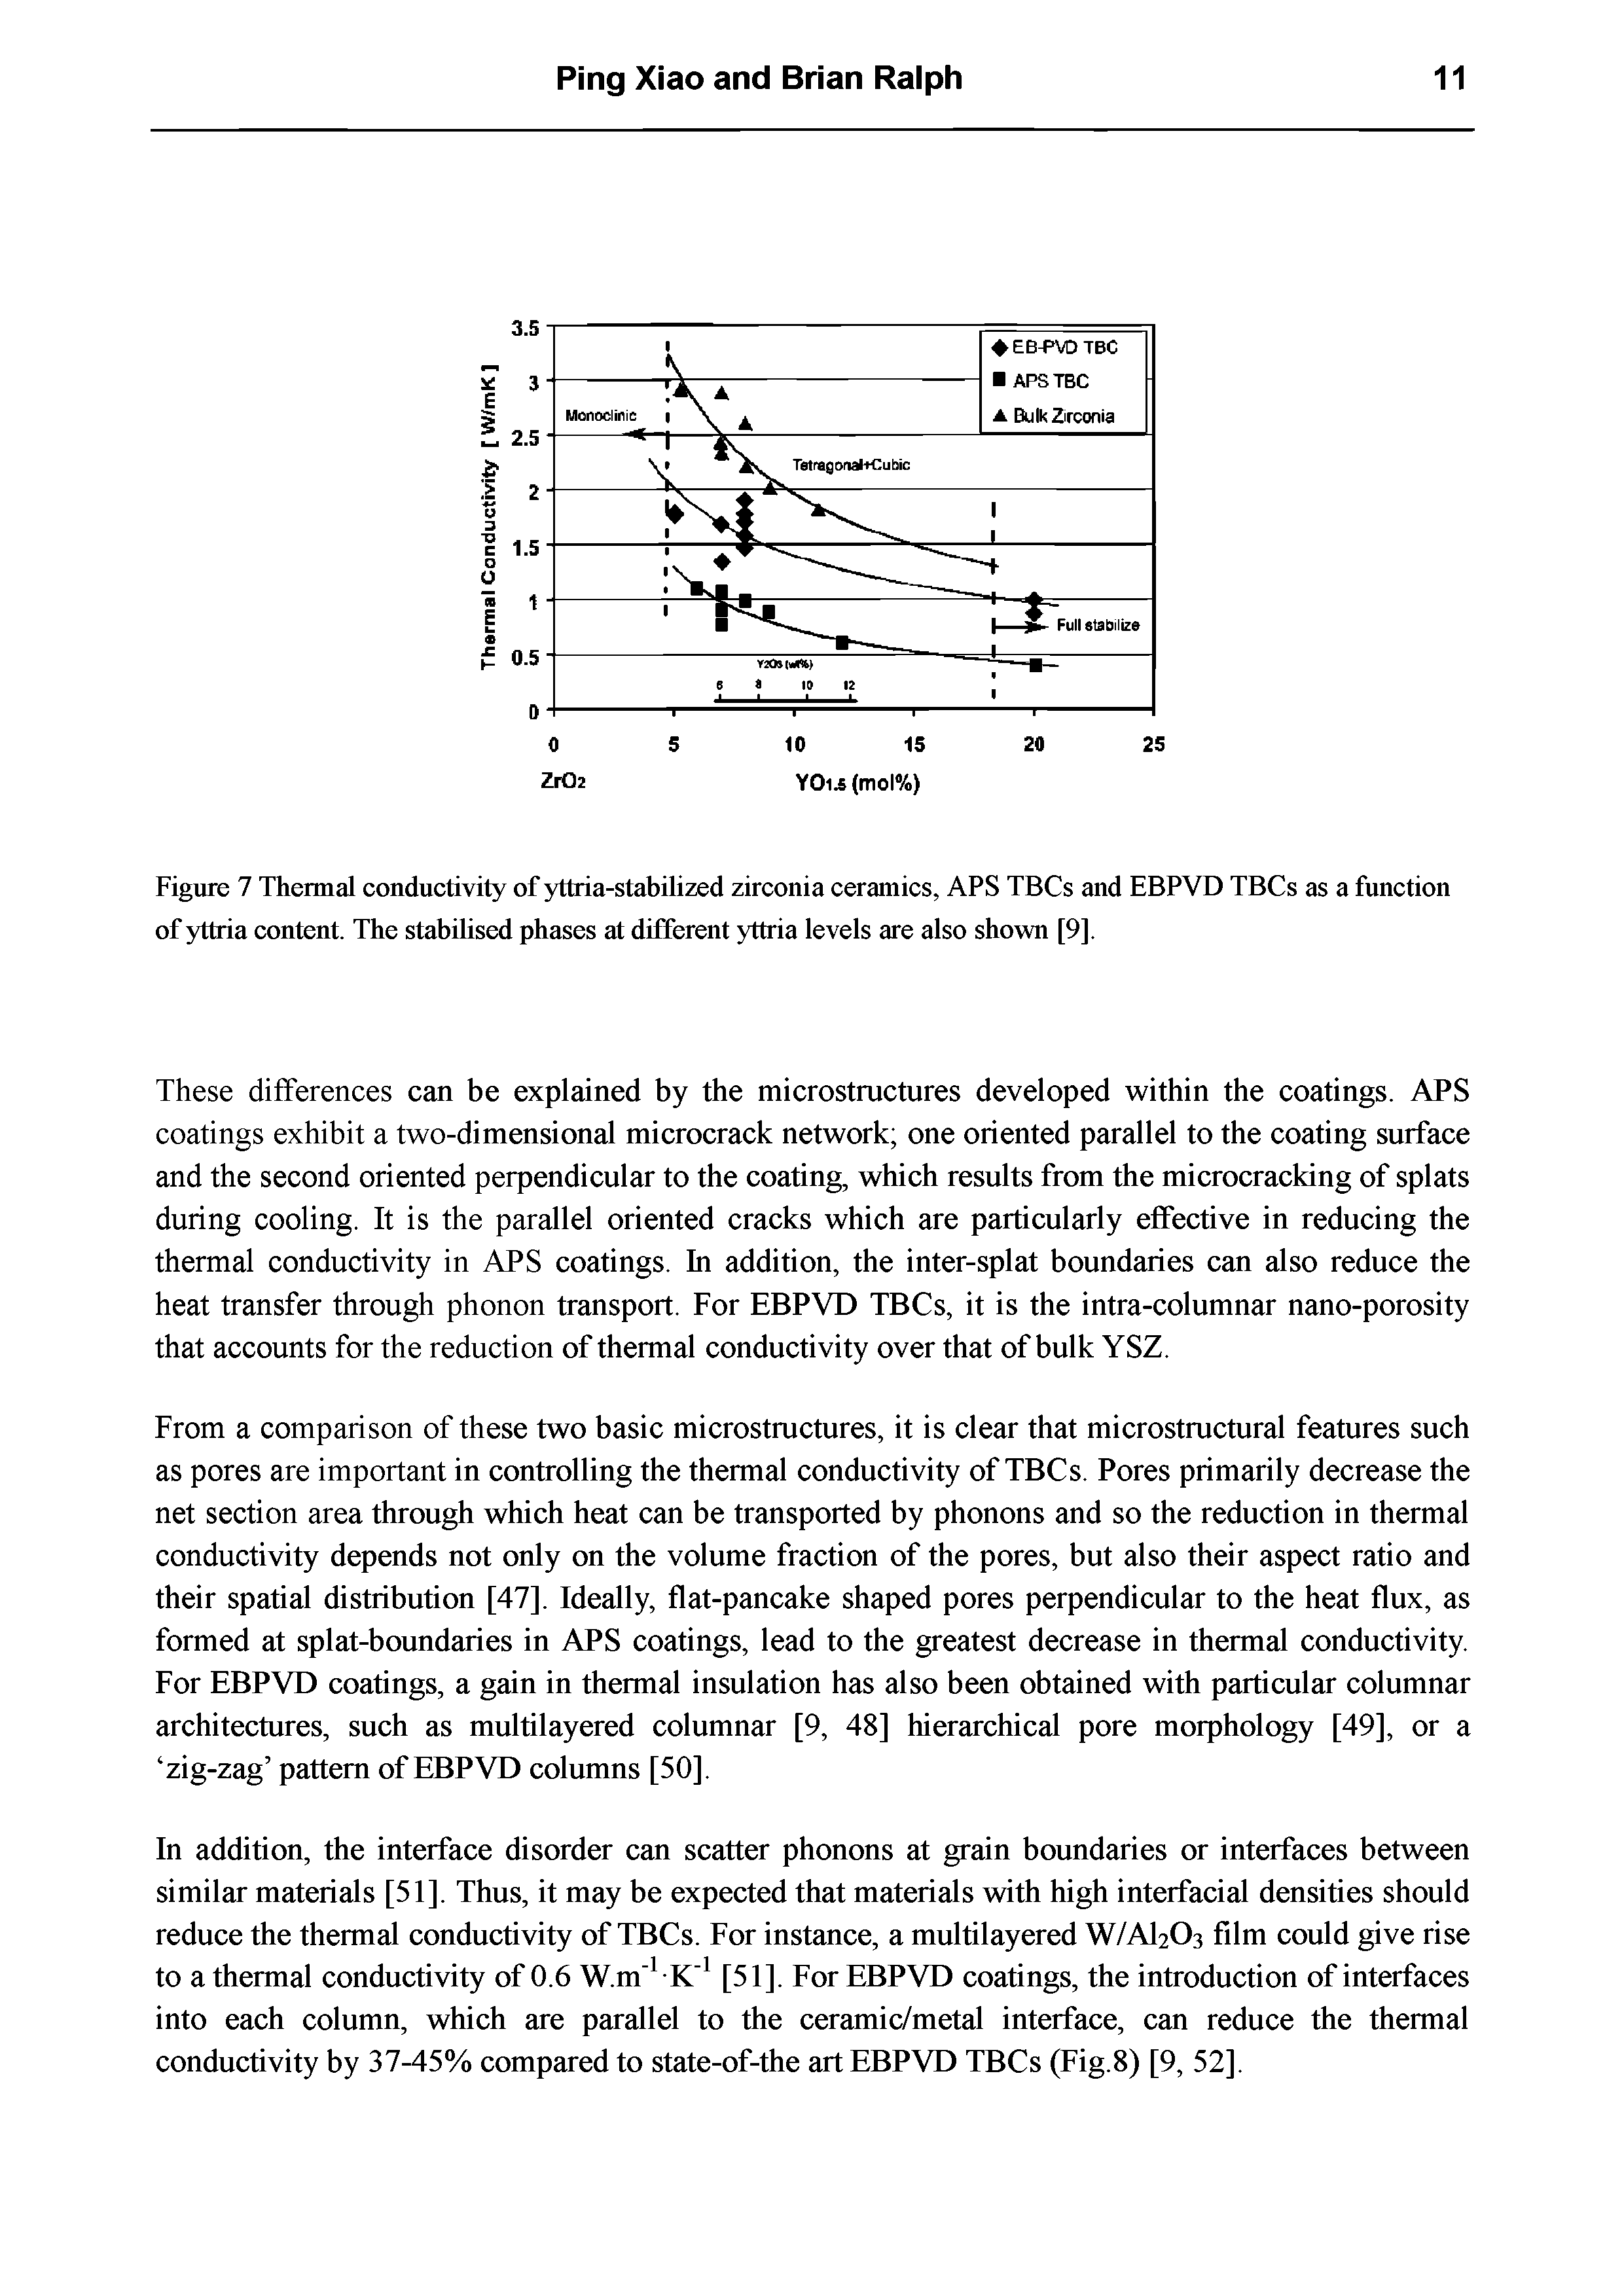 Figure 7 Thermal conduetivity of yttria-stabilized zirconia ceramics, APS TBCs and EBPVD TBCs as a function of yttria content. The stabilised phases at different yttria levels are also shown [9].